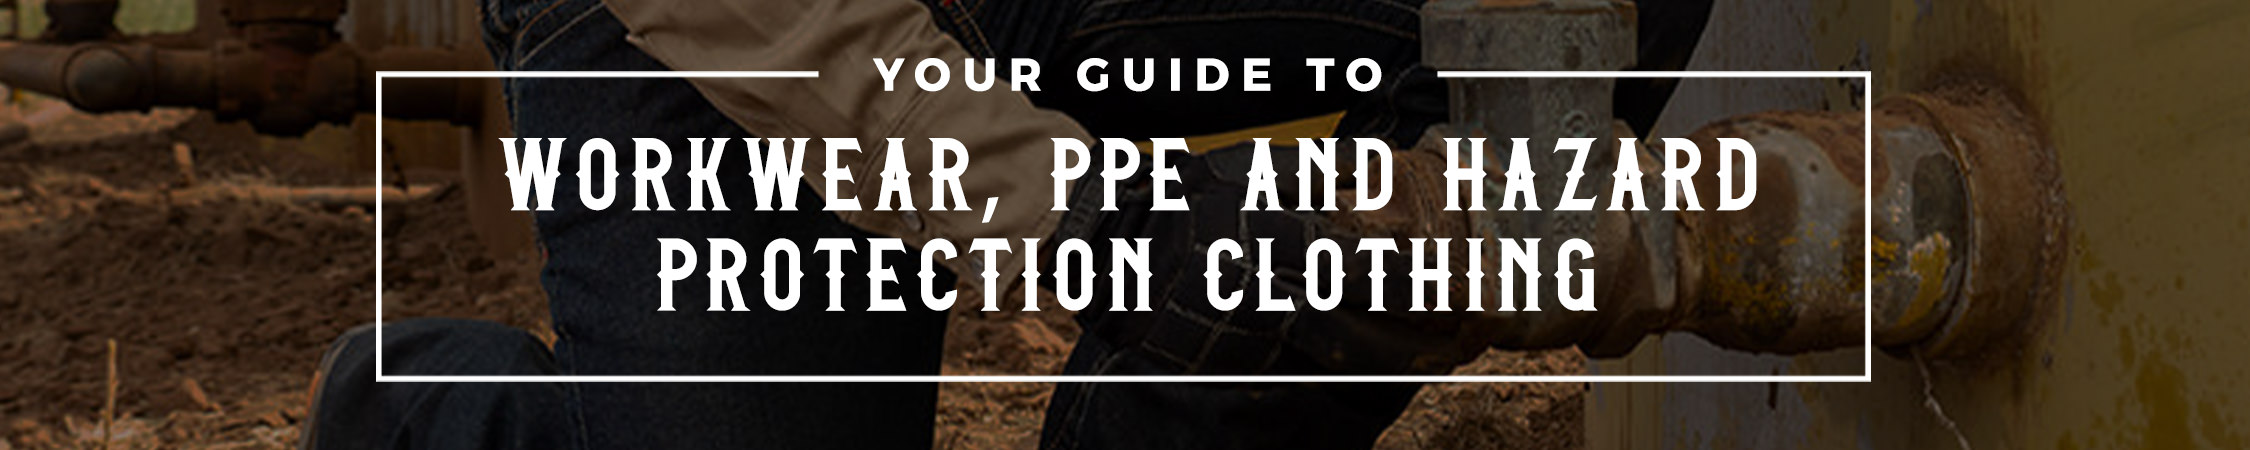 Your Guide to Workwear, PPE, and Hazard Protection Clothing